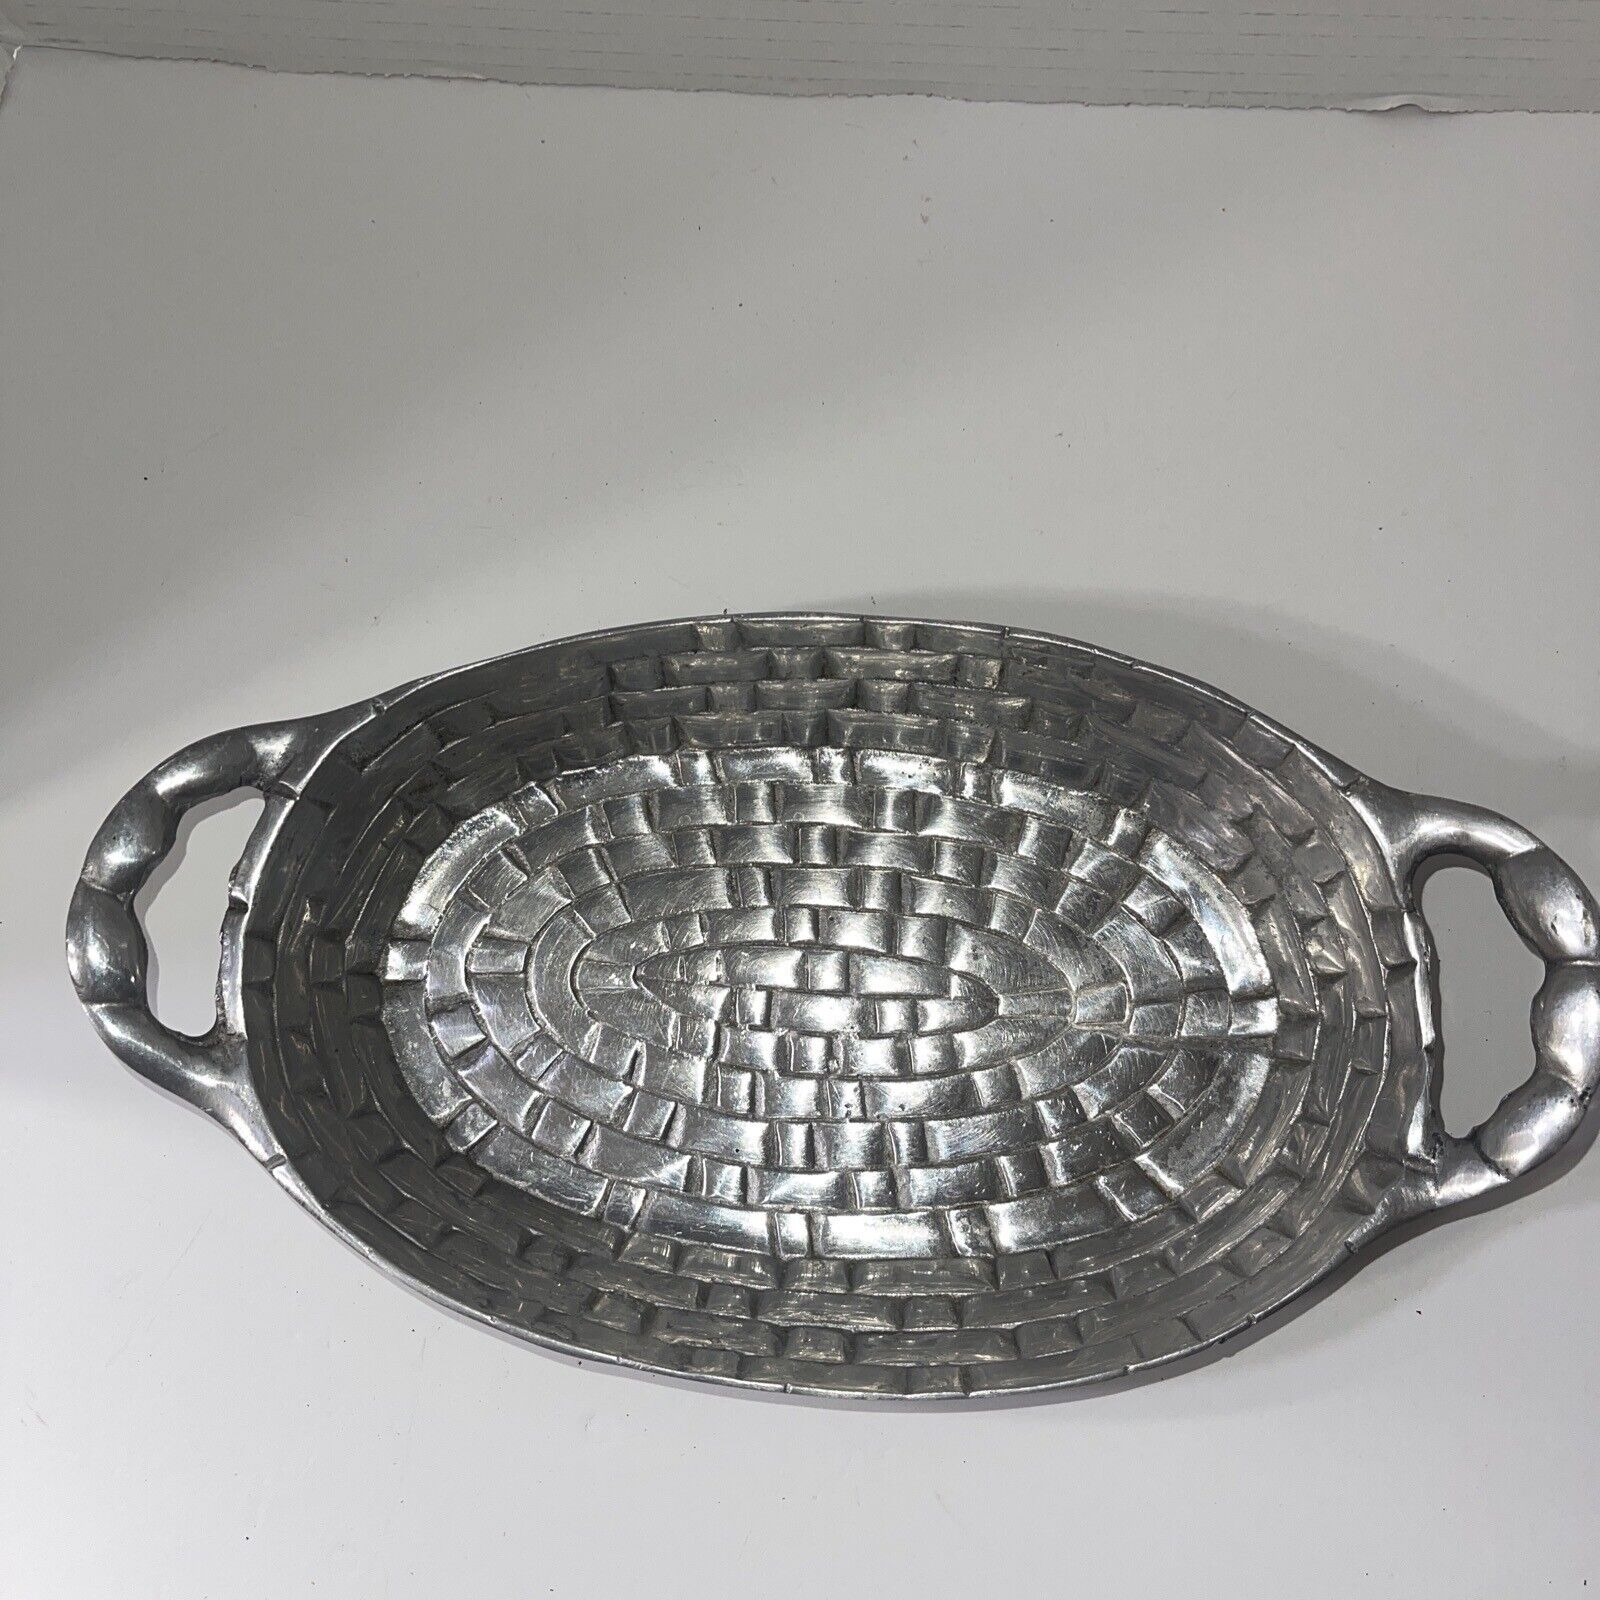 HECH EN PEWTER ALUMINUM WOVEN OVAL BREAD BASKET DISH WITH HANDLES